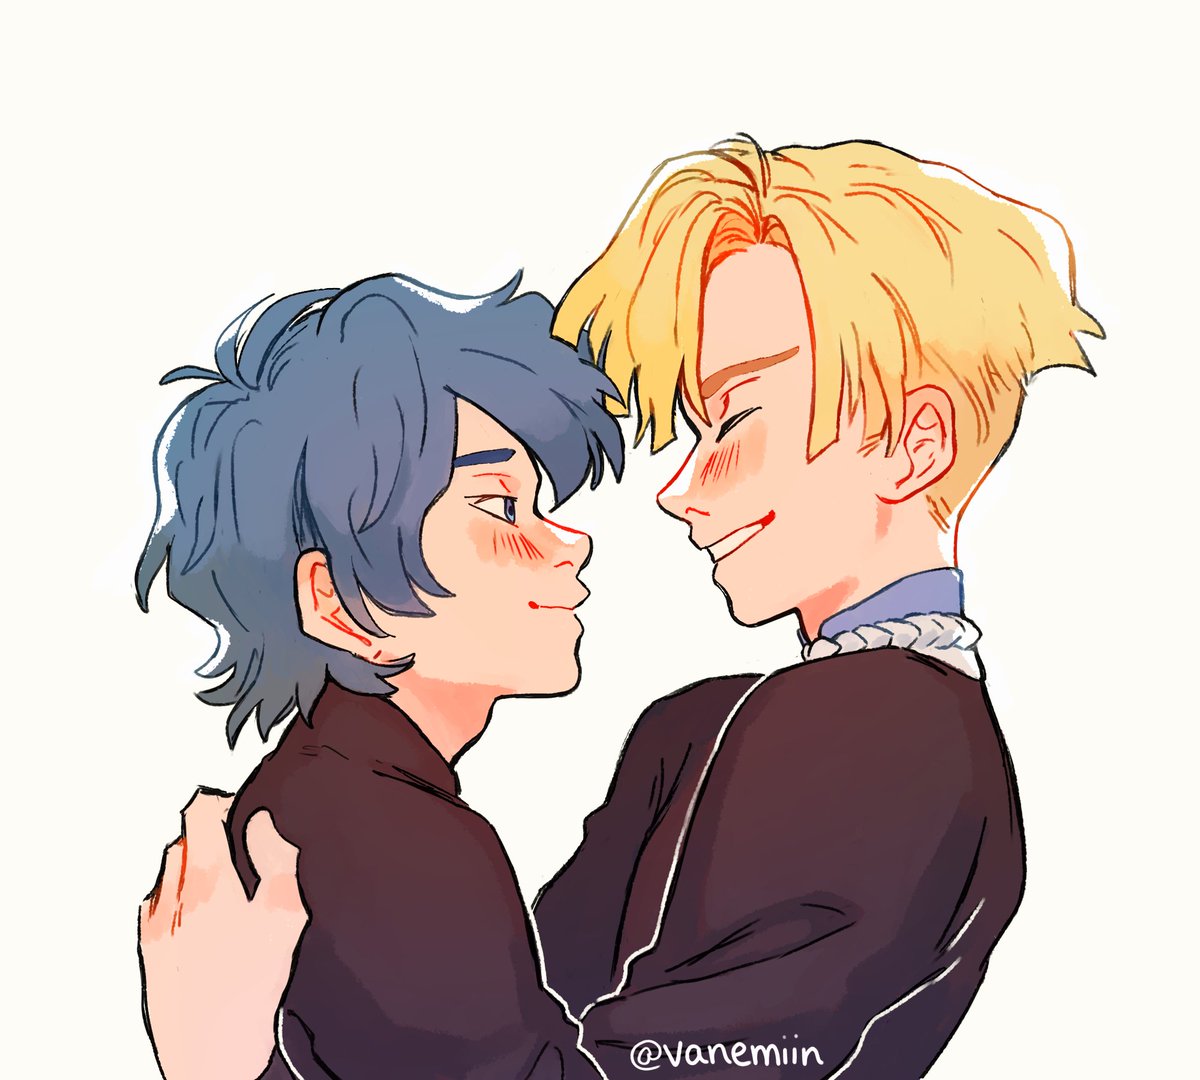 A really simple dimileth drawing because I miss them terribly 💙 #FireEmblem #FireEmblemThreeHouses